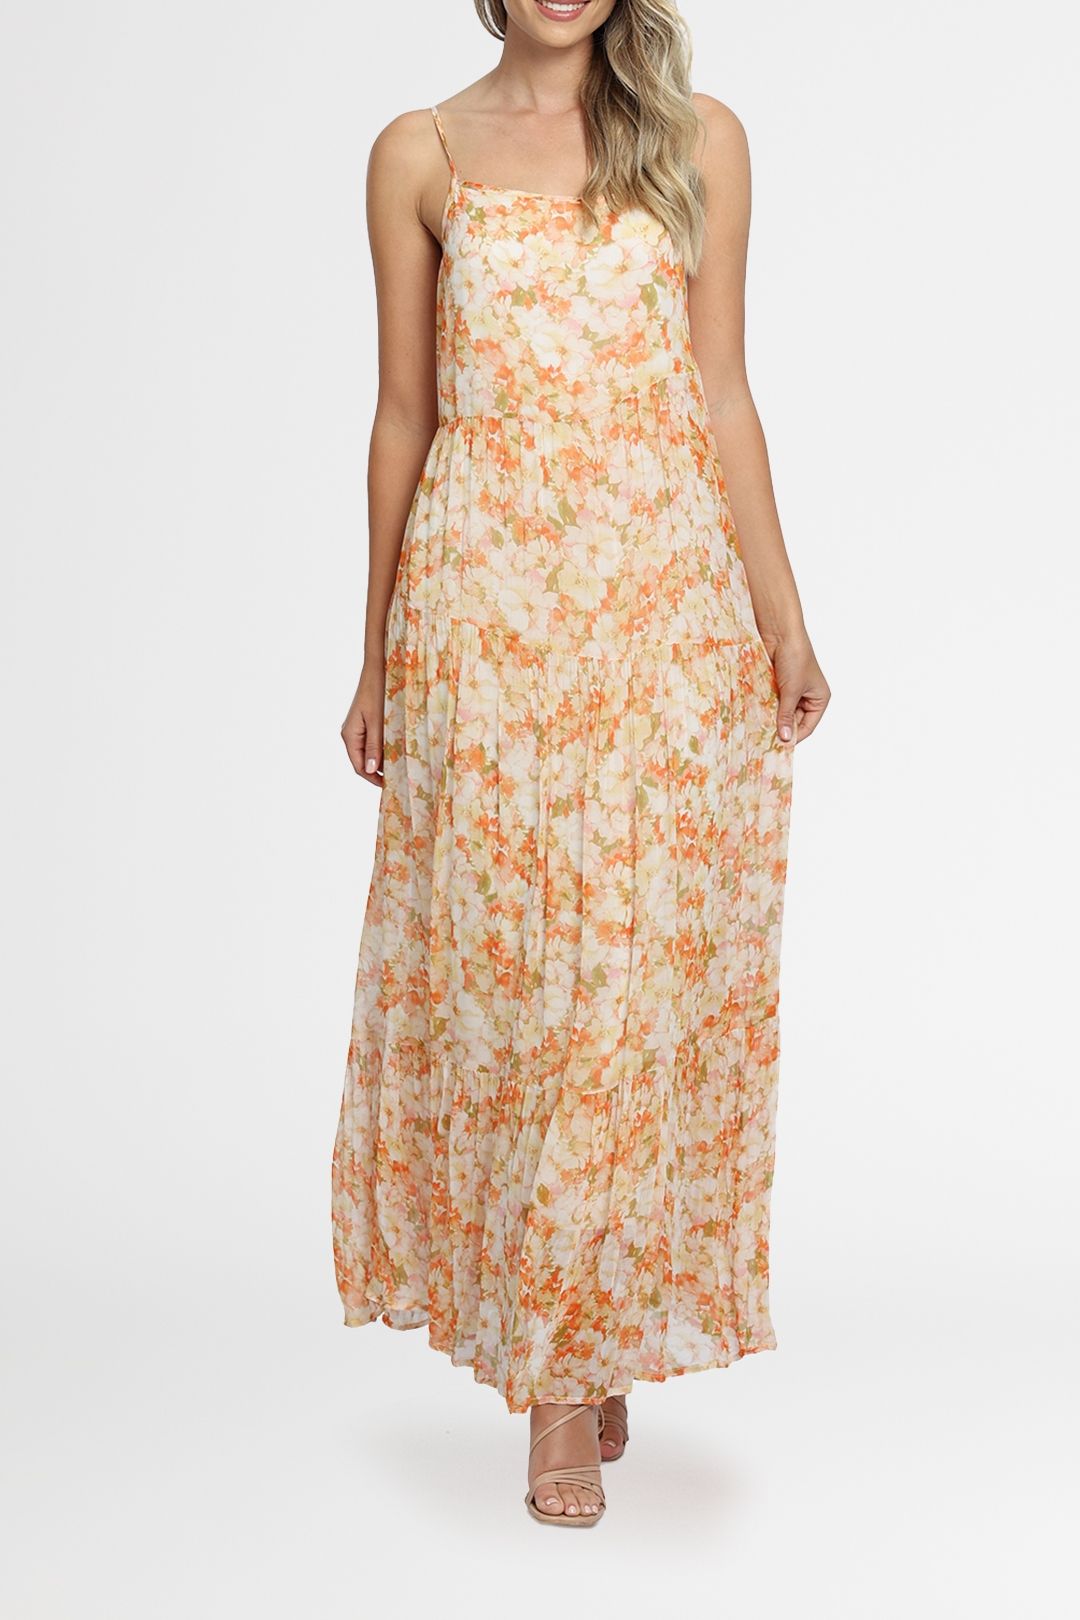 Ministry of Style Spring Meadows Maxi Dress floral